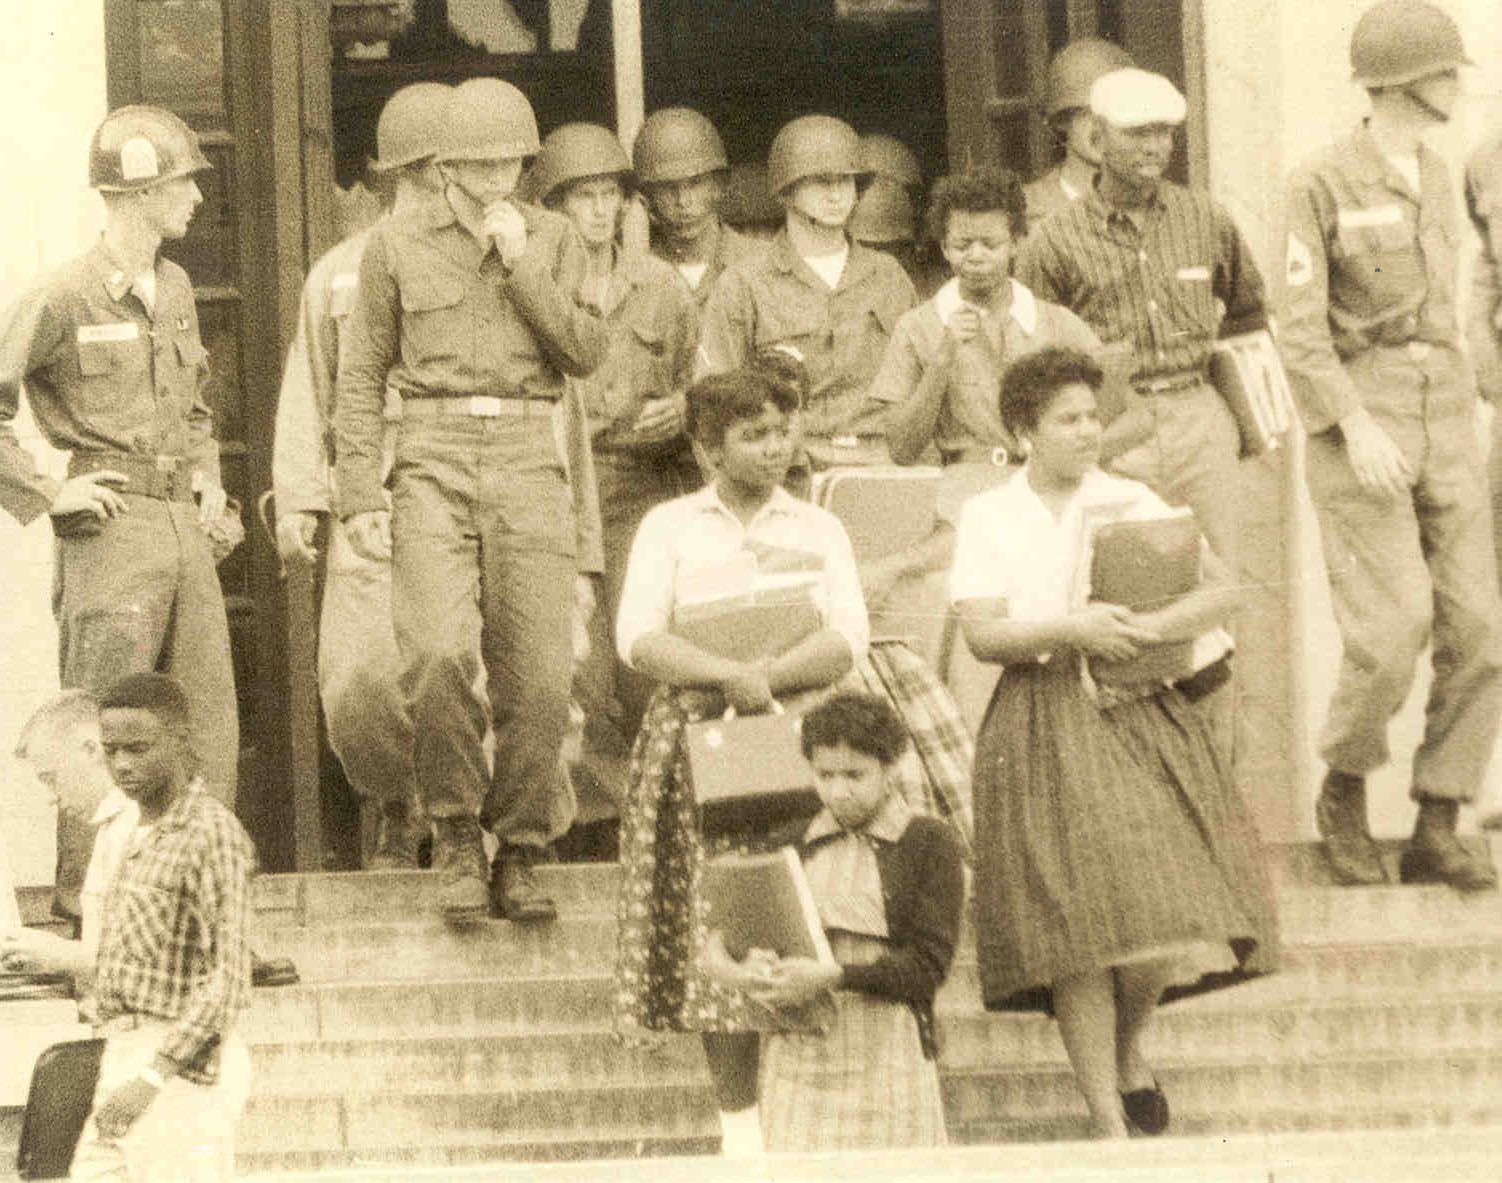 The Little Rock Nine exit the doors at Central High under troop escort